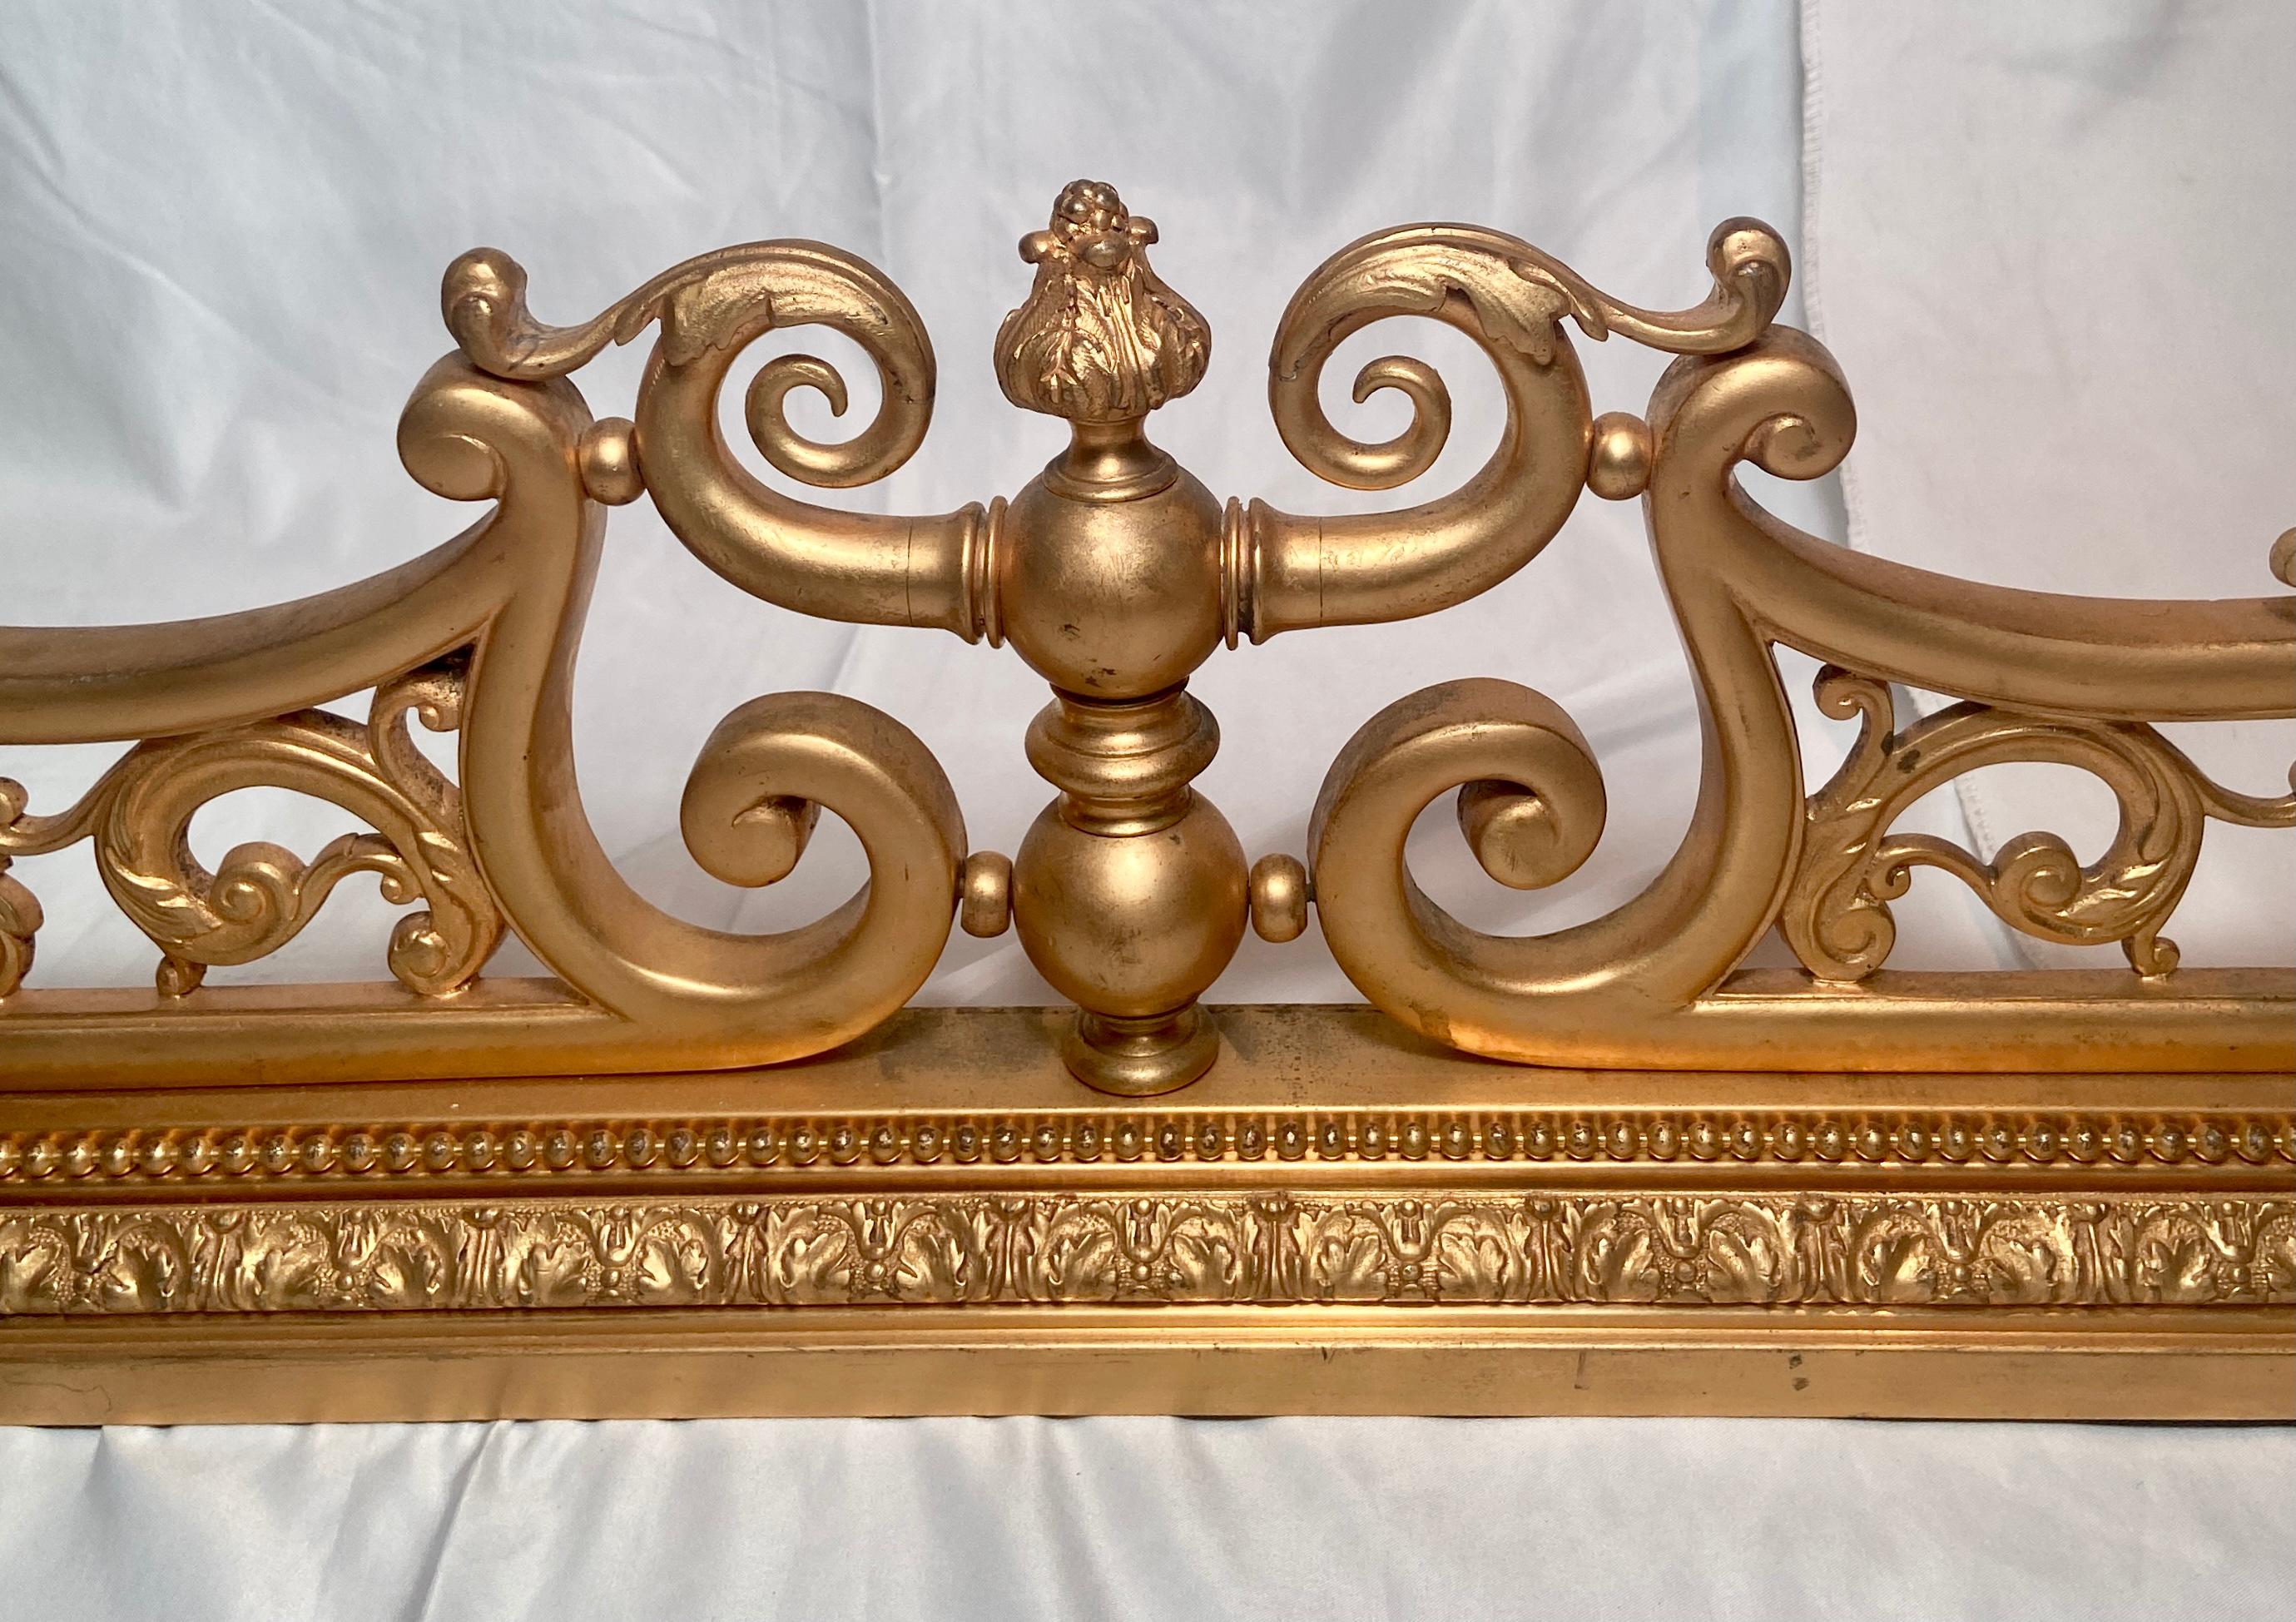 Antique French Louis XVI Style Ormolu Fireplace Fender In Good Condition For Sale In New Orleans, LA